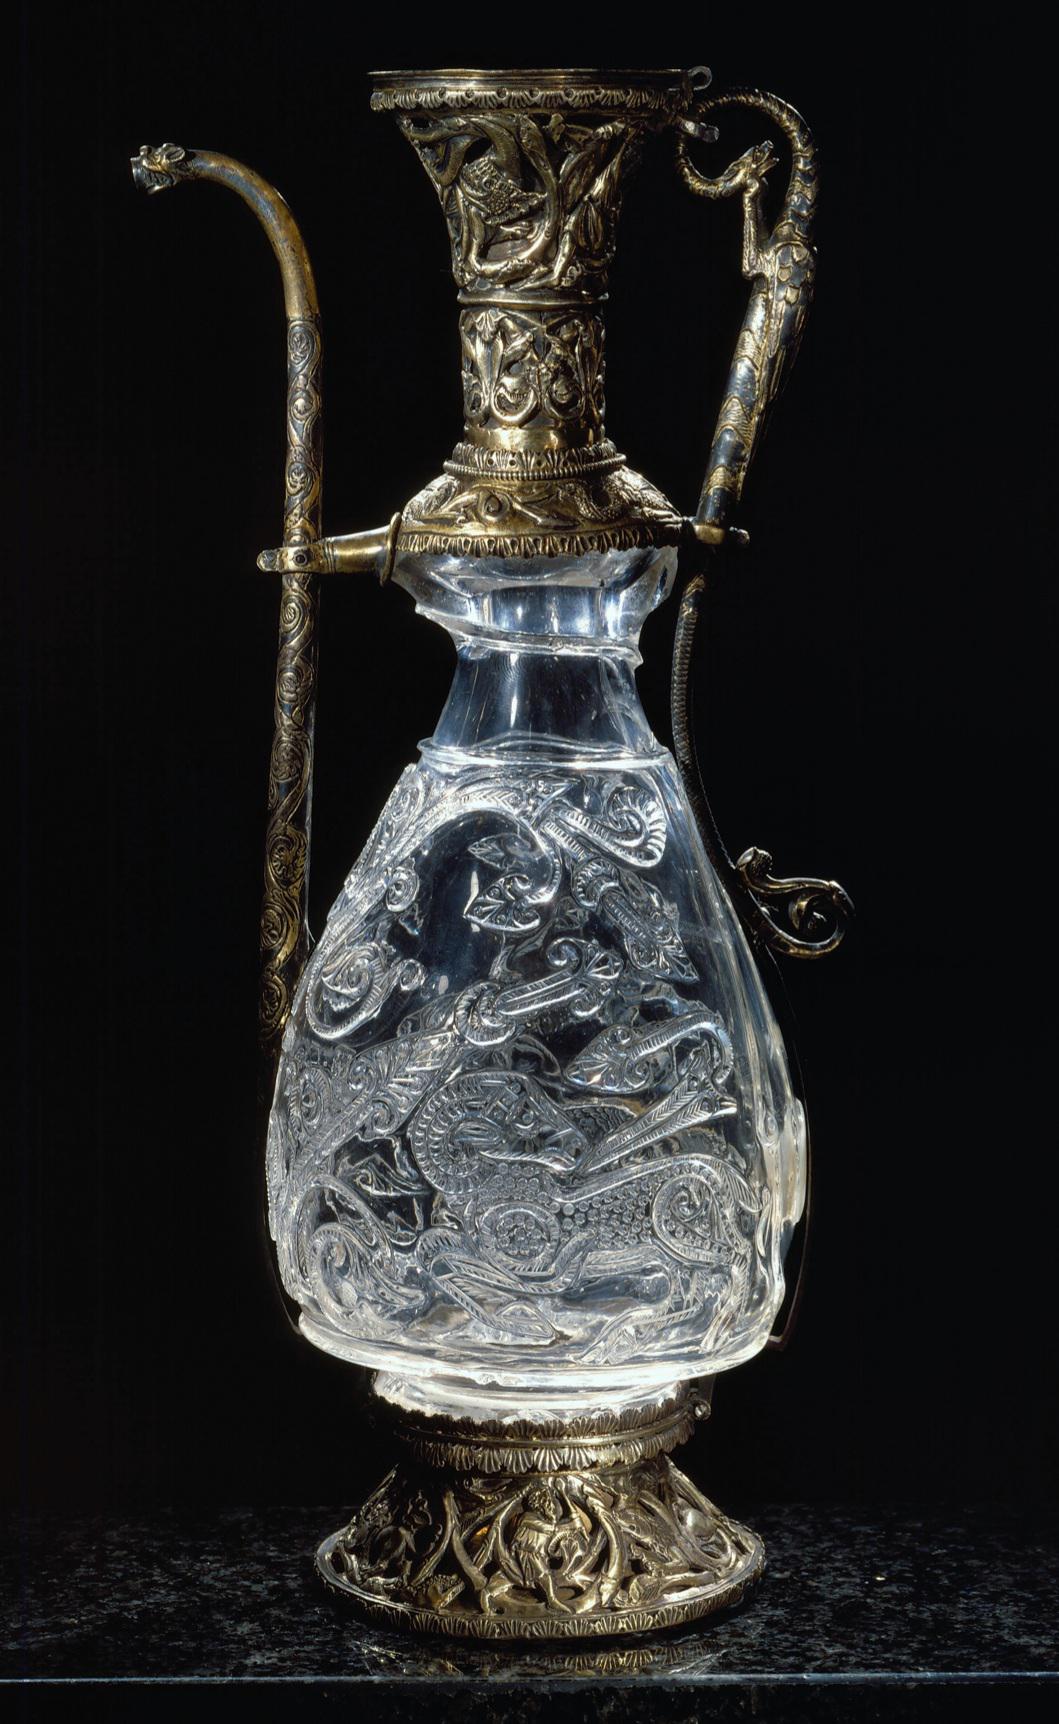 A Fatimid rock crystal ewer carved from a single block of rock crystal. From Egypt, 10th-11th century CE, now on display at the treasury of the Basilica of San Marco in Venic.jpg